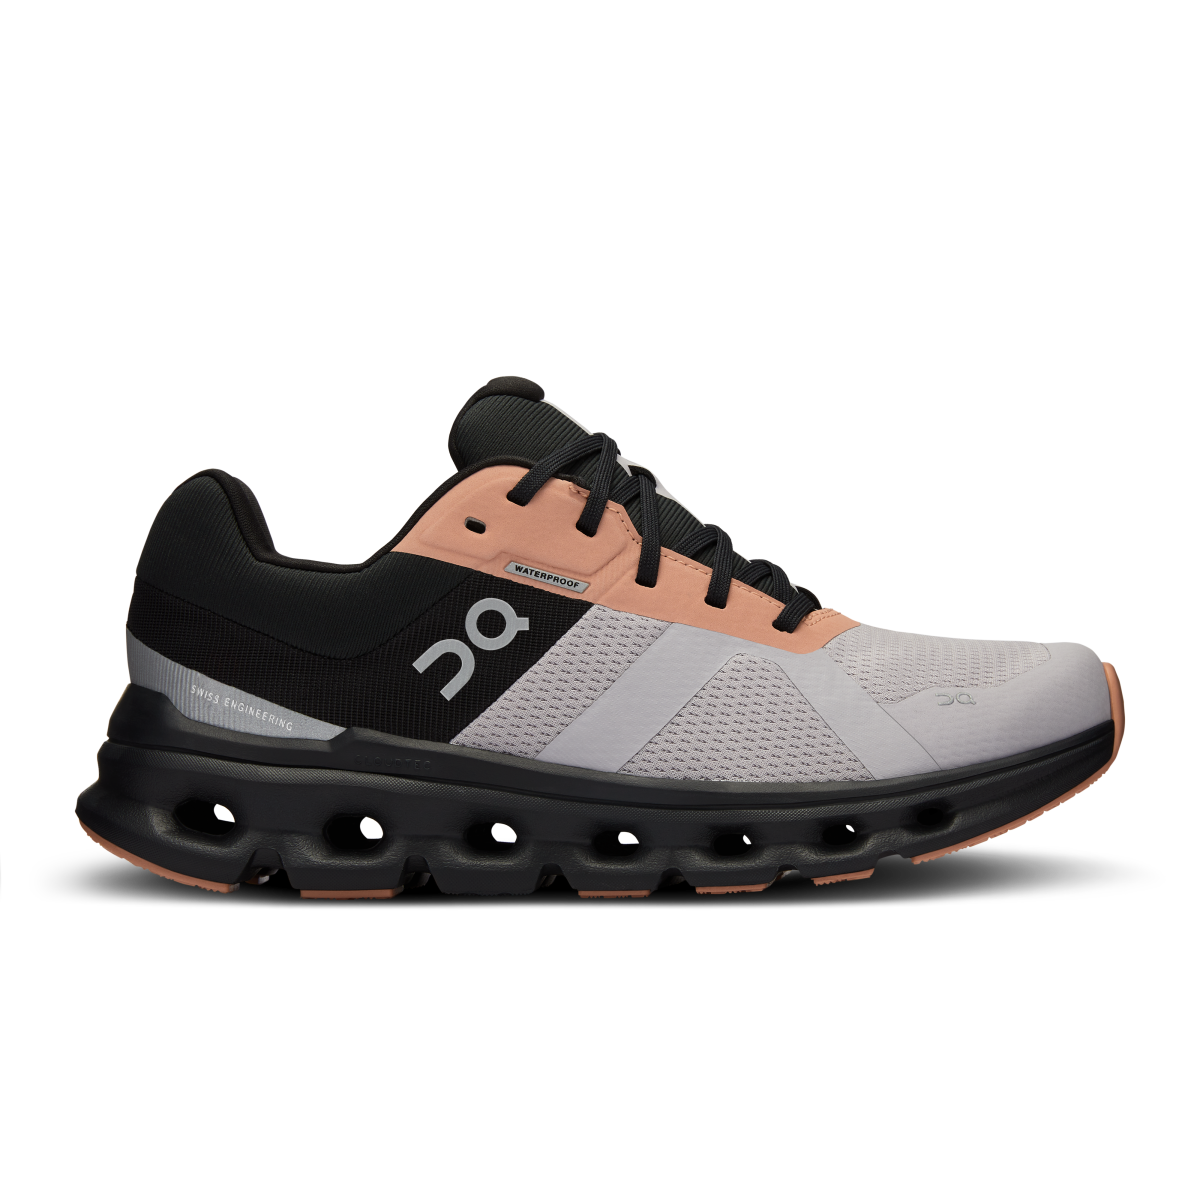 Women's Cloudrunner Waterproof | Fade & Black | On United States